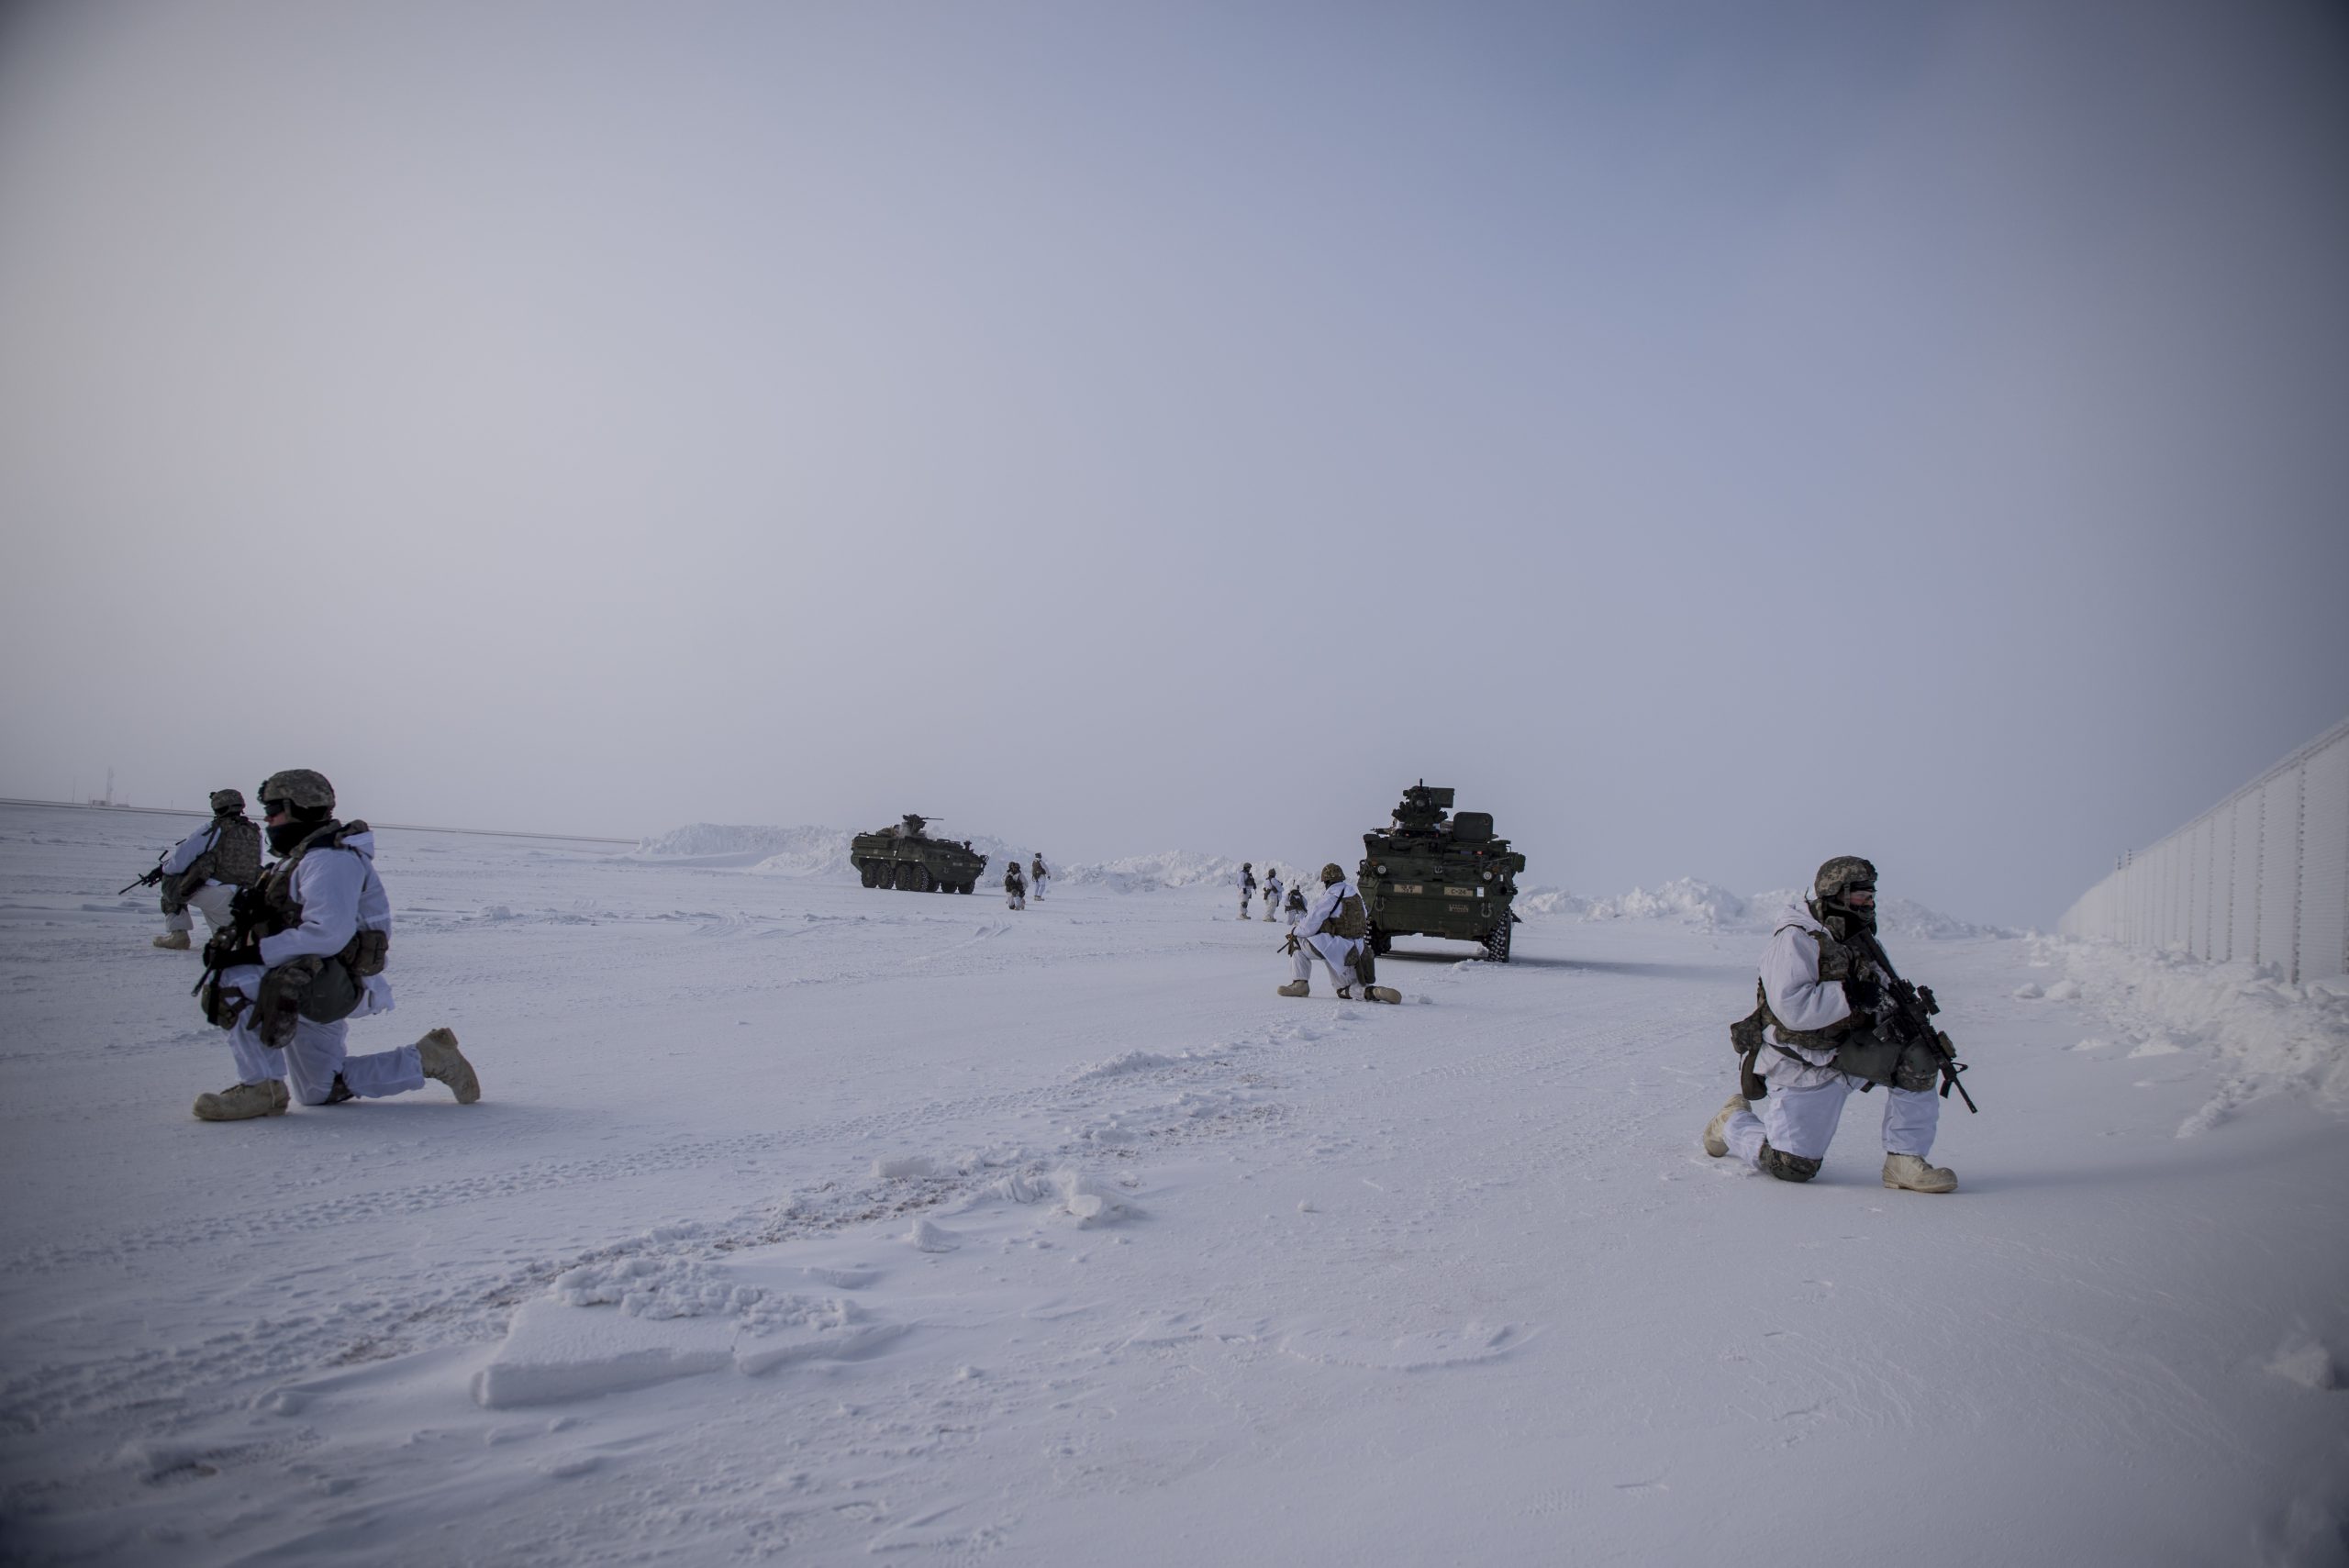 Soldiers assigned to 3rd Battalion, 21st Infantry Regiment provide overwatch during a deployment of Stryker armored vehicles as part of the U.S. Army Alaska-led Arctic Edge 2018 exercise held at Eielson Air Force Base, Alaska, March 13, 2018. Arctic Edge 2018 is a biennial, large-scale, joint-training exercise that prepares and tests the U.S. military’s ability to operate tactically in extreme cold-weather conditions found in arctic environments Air Force photo by Airman 1st Class Isaac Johnson. -